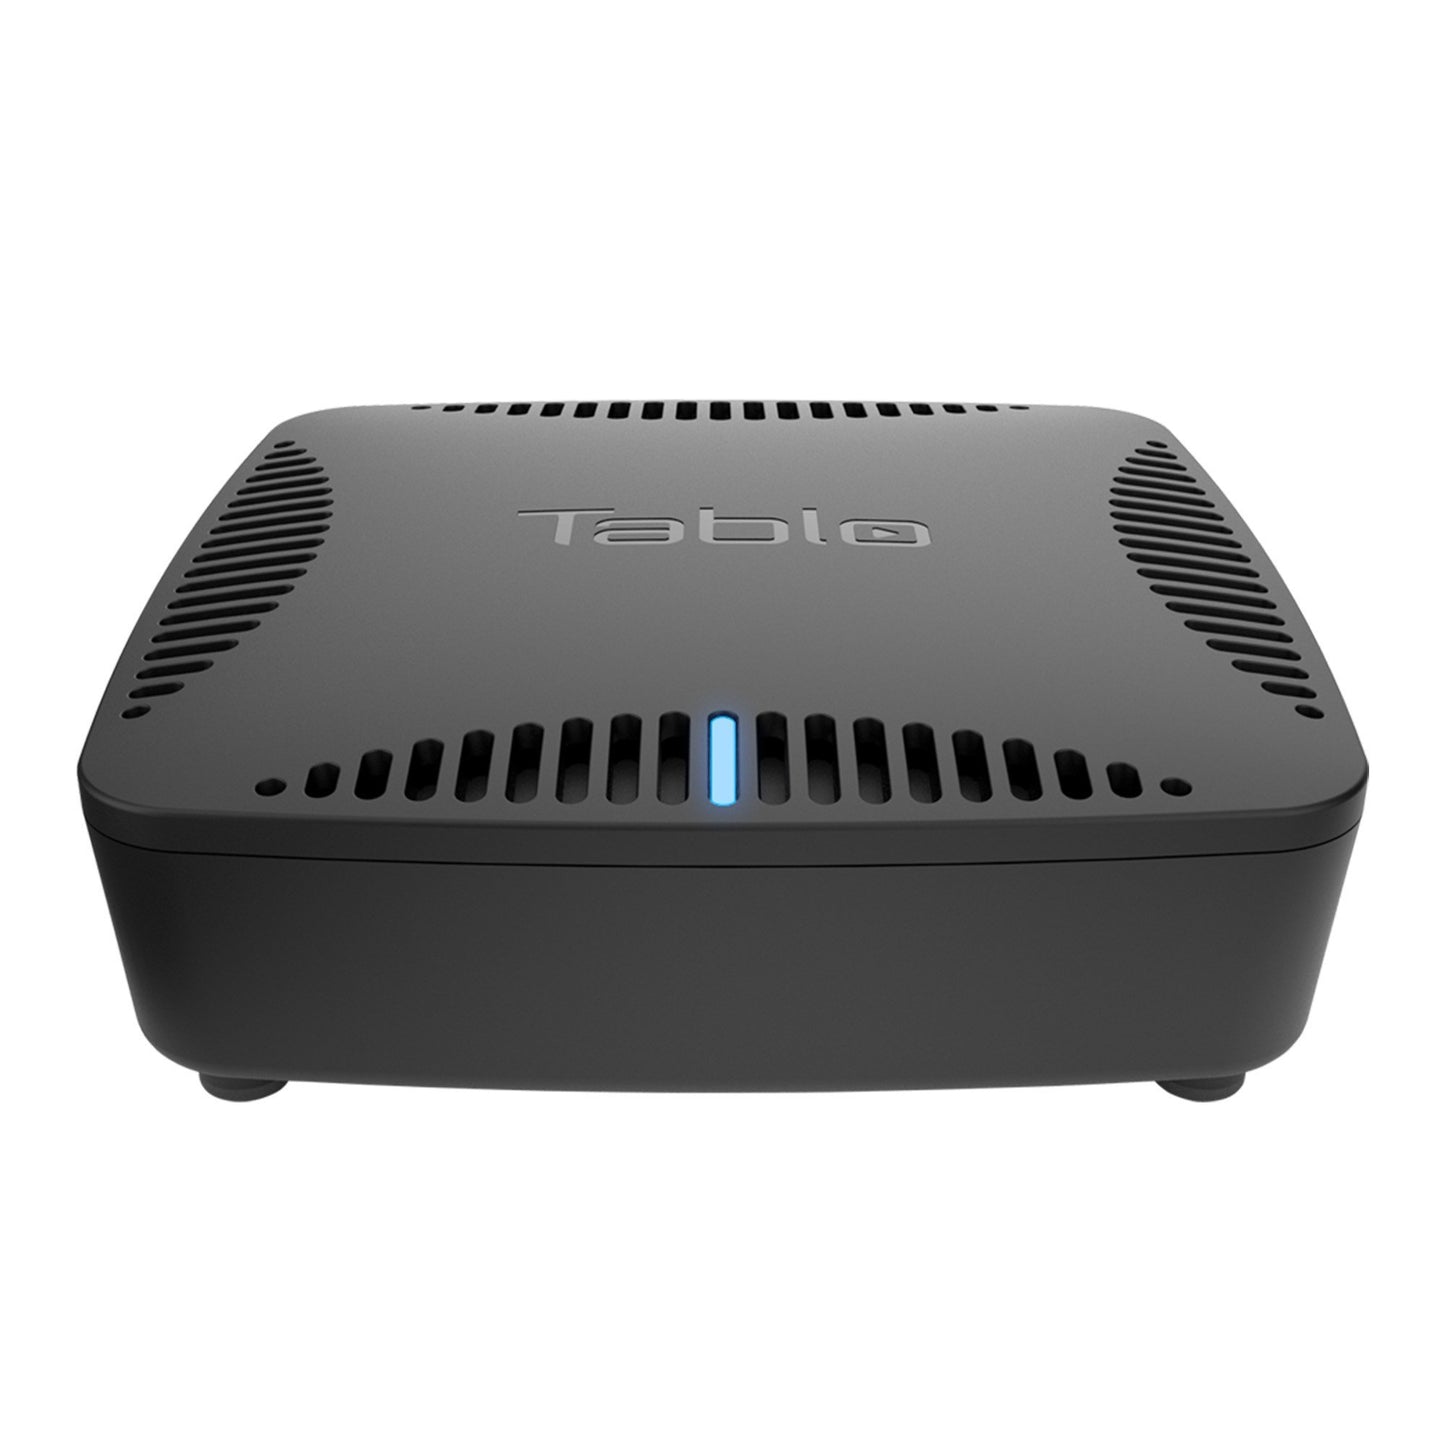 Tablo DUAL LITE Over-The-Air (OTA) DVR (Digital Video Recorder) for Cord Cutters. DVR hardware. 